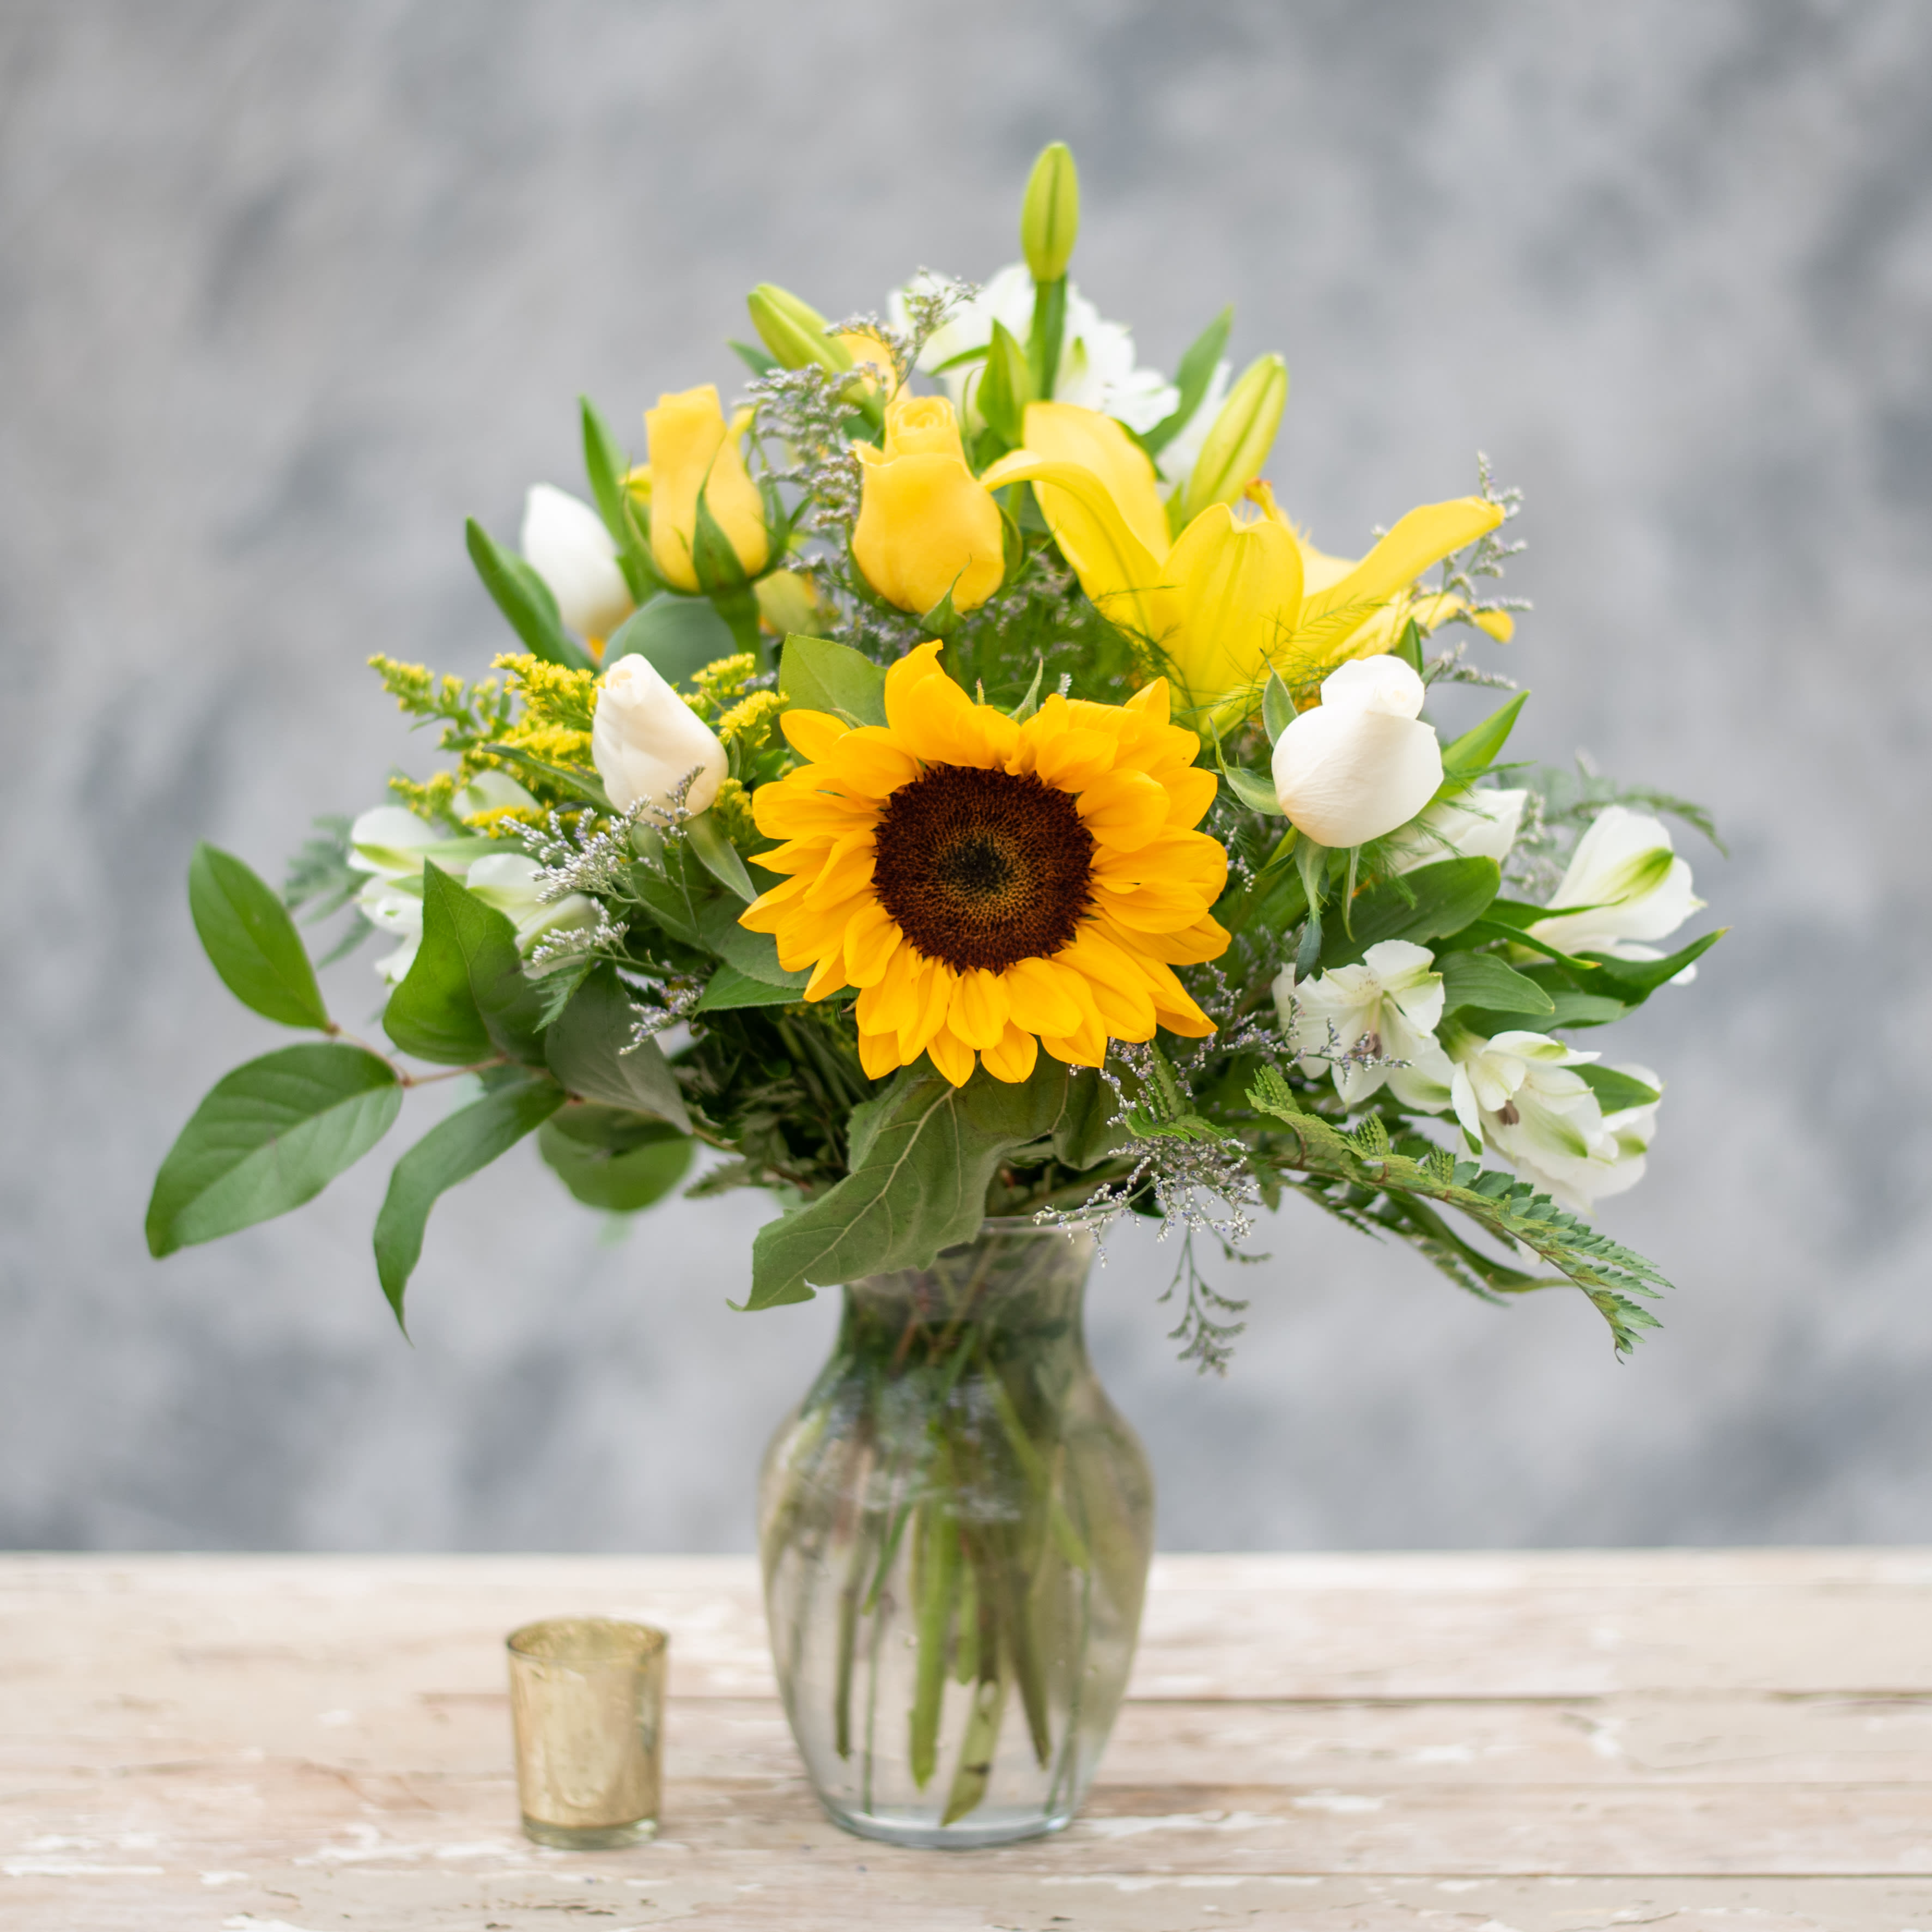 Sunshine and Roses - Impress your special someone with this simple, elegant yellow and white arrangement filled with yellow sunflowers, and lilies, along with beautiful yellow and white roses, accented with white tulips,  alstroemeria and limonium.  A stunning addition to any table.